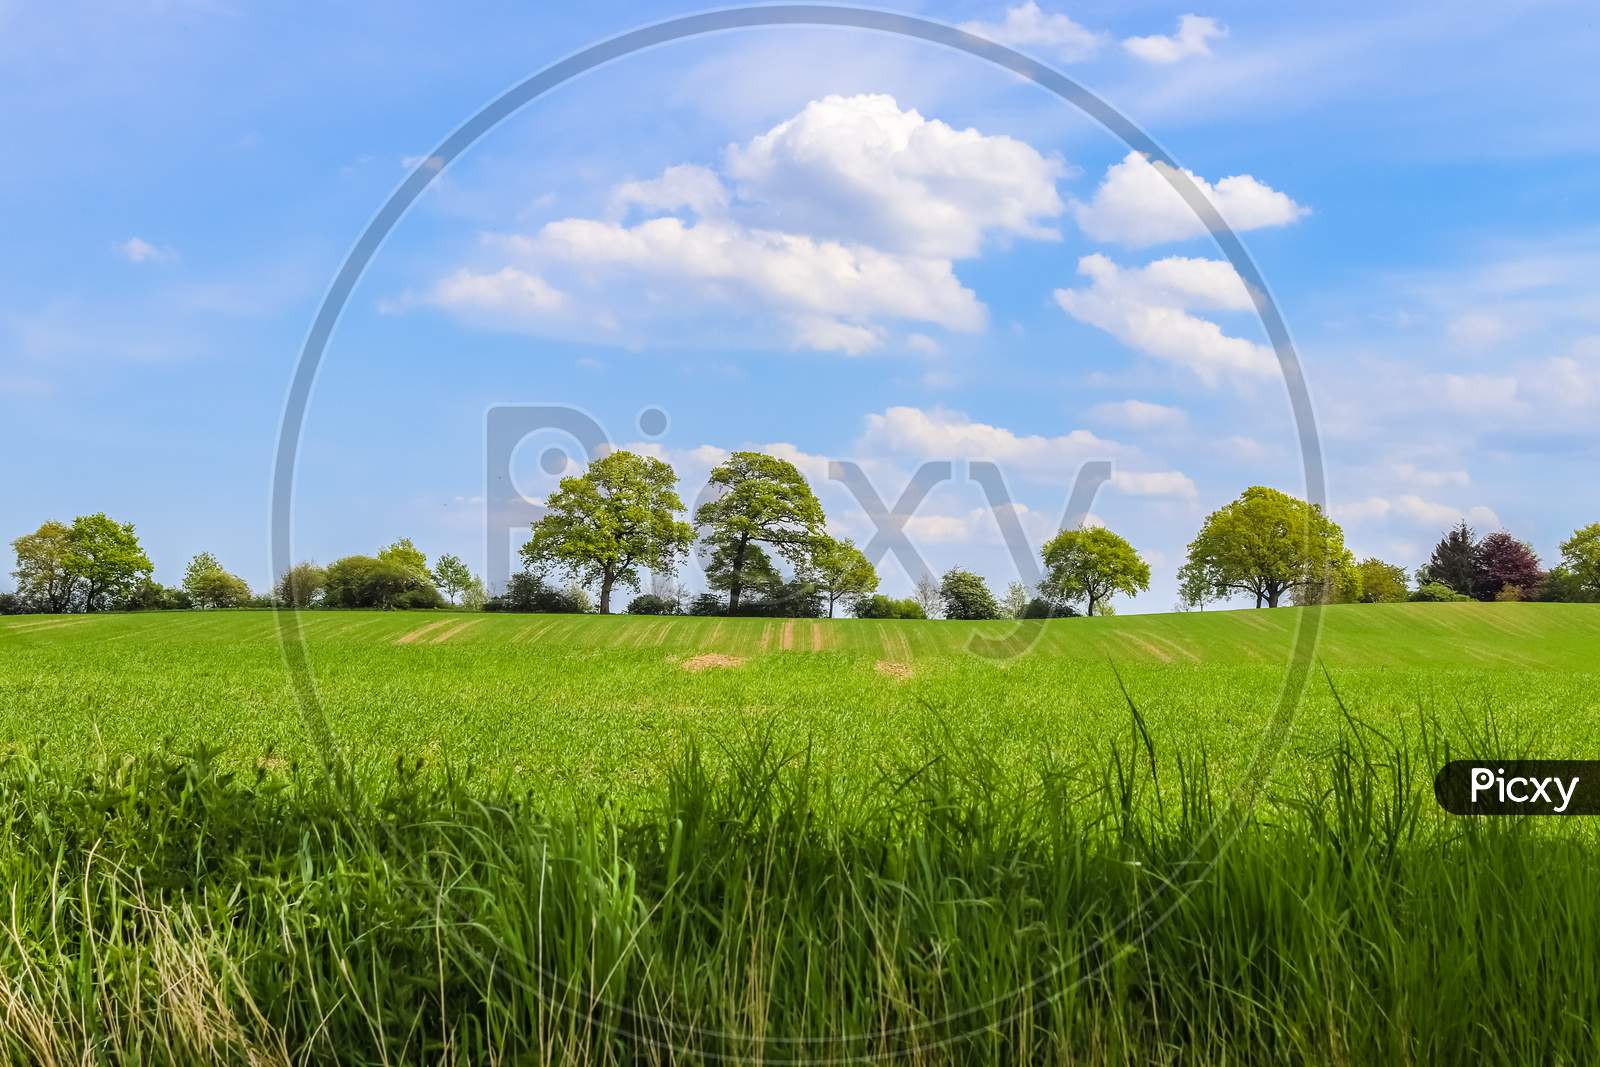 Lonely old tree on a green meadow with a blue sky in summer found in northern europe